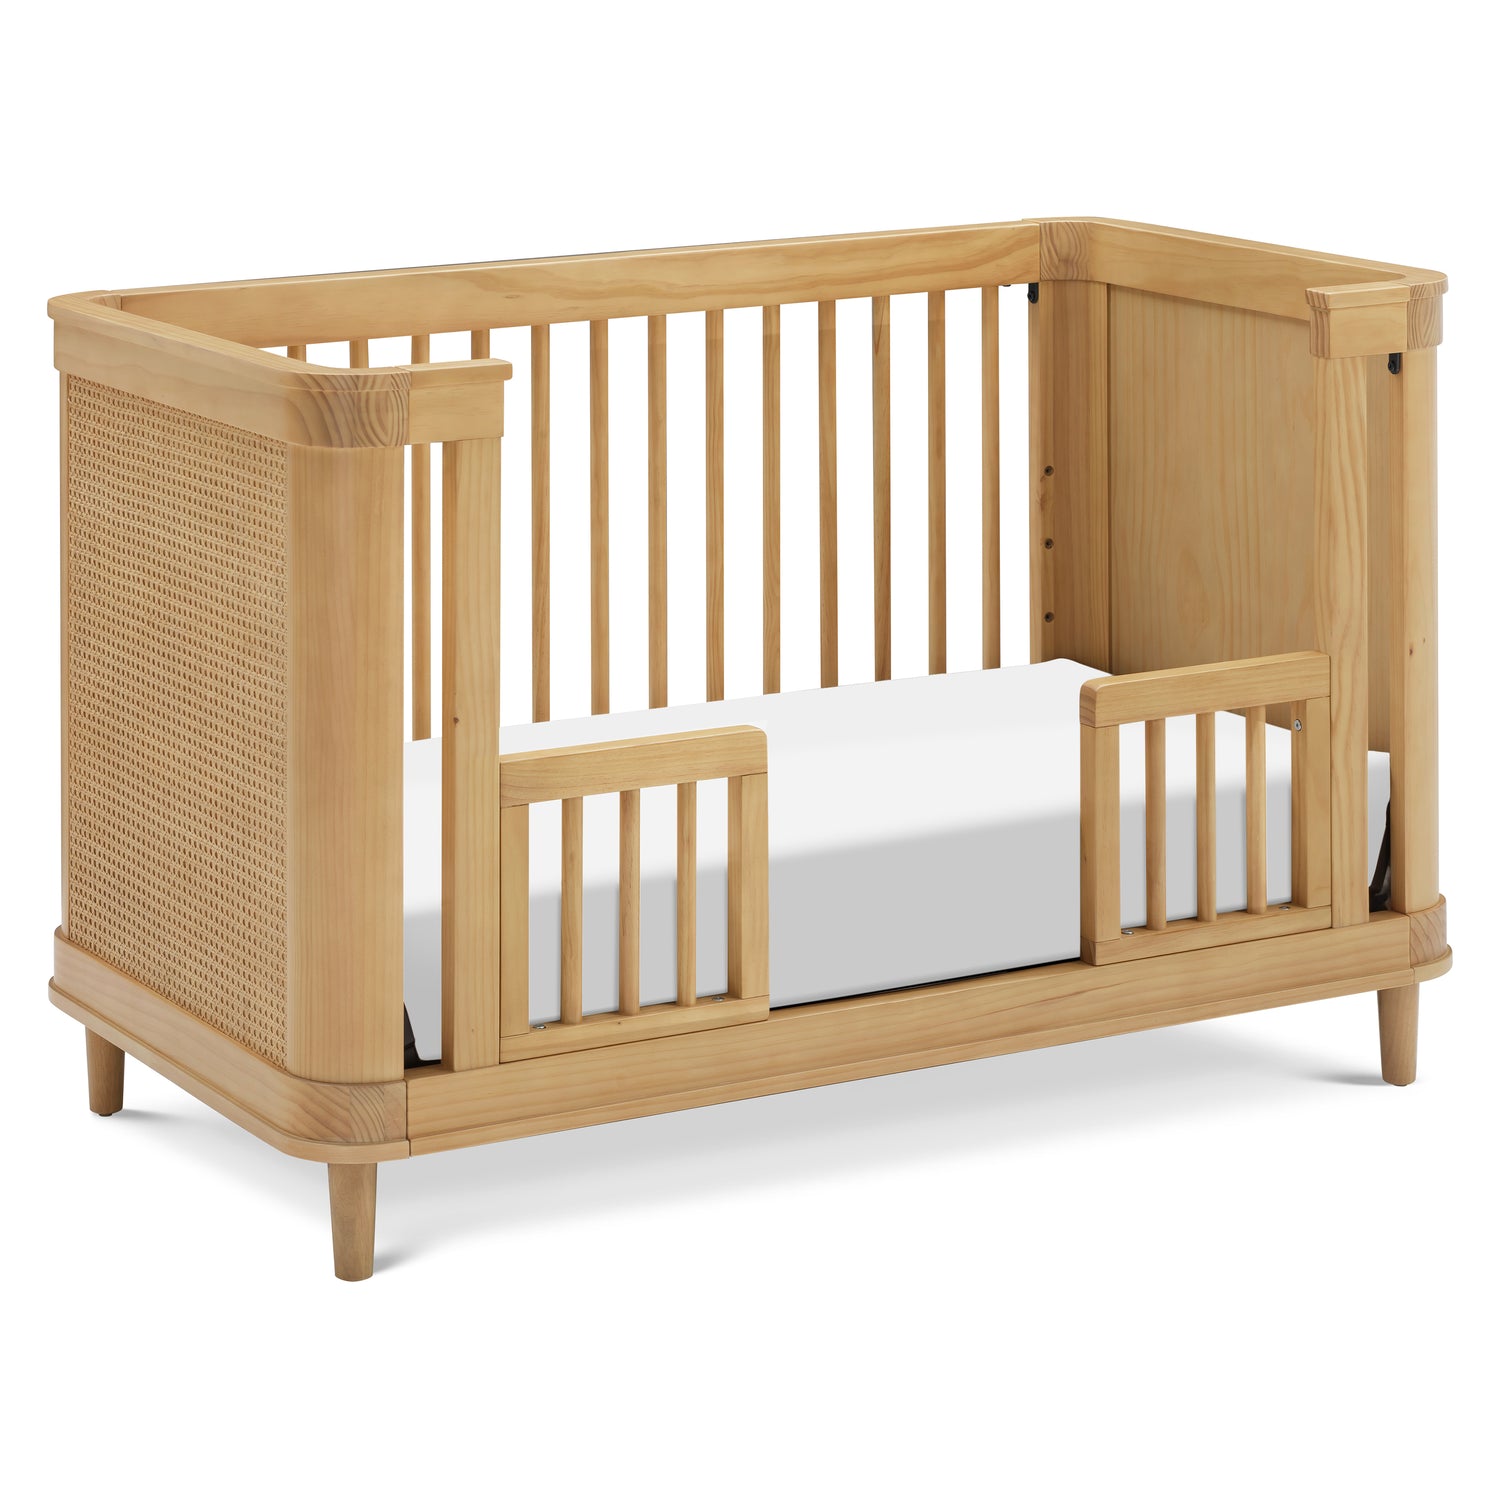 Toddler bed, M23701HYHC,Marin with Cane 3-in-1 Convertible Crib in Honey and Honey Cane